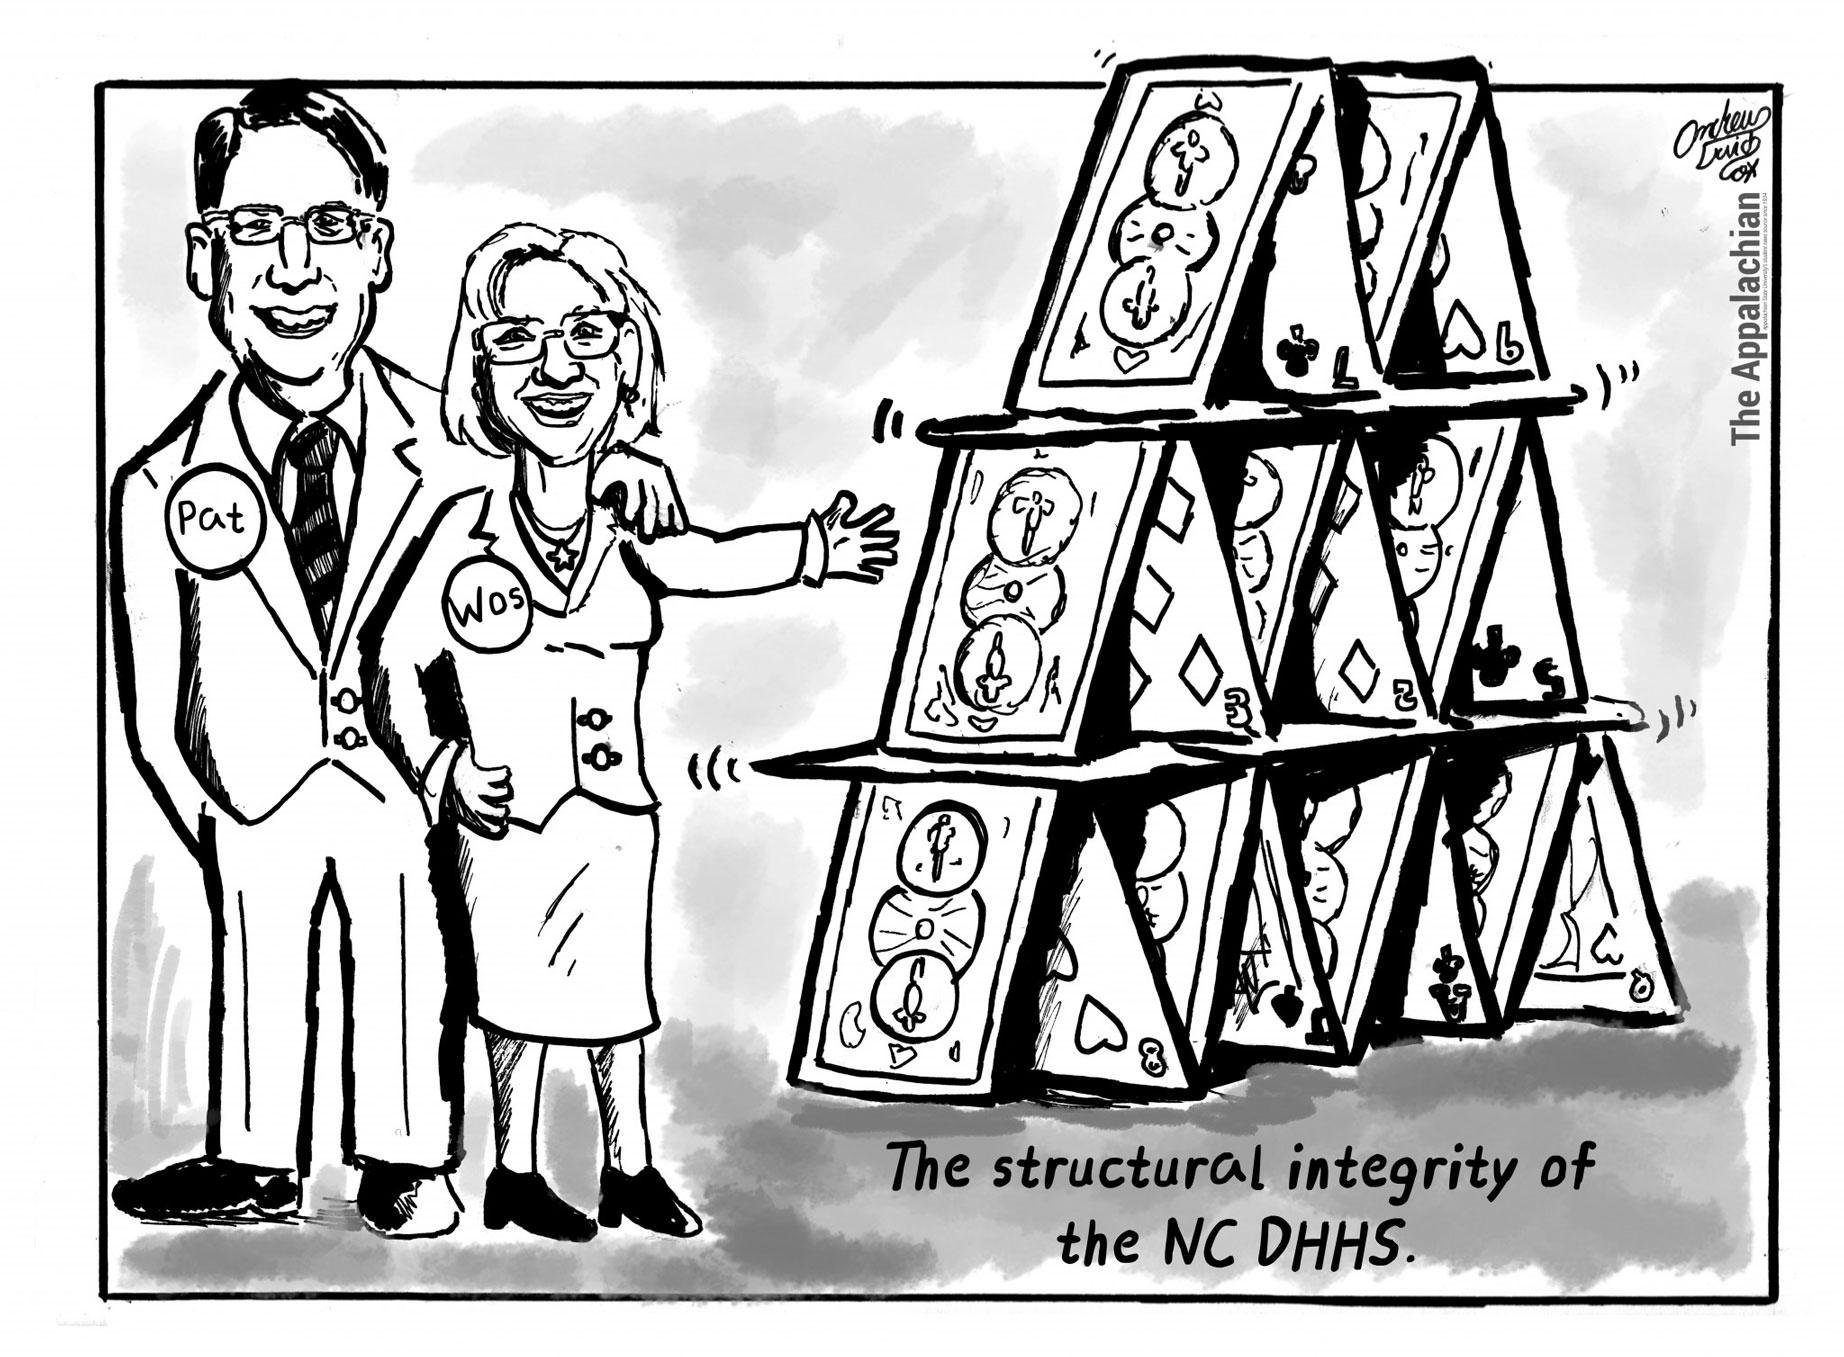 NC DHHS becoming a house of cards under Wos